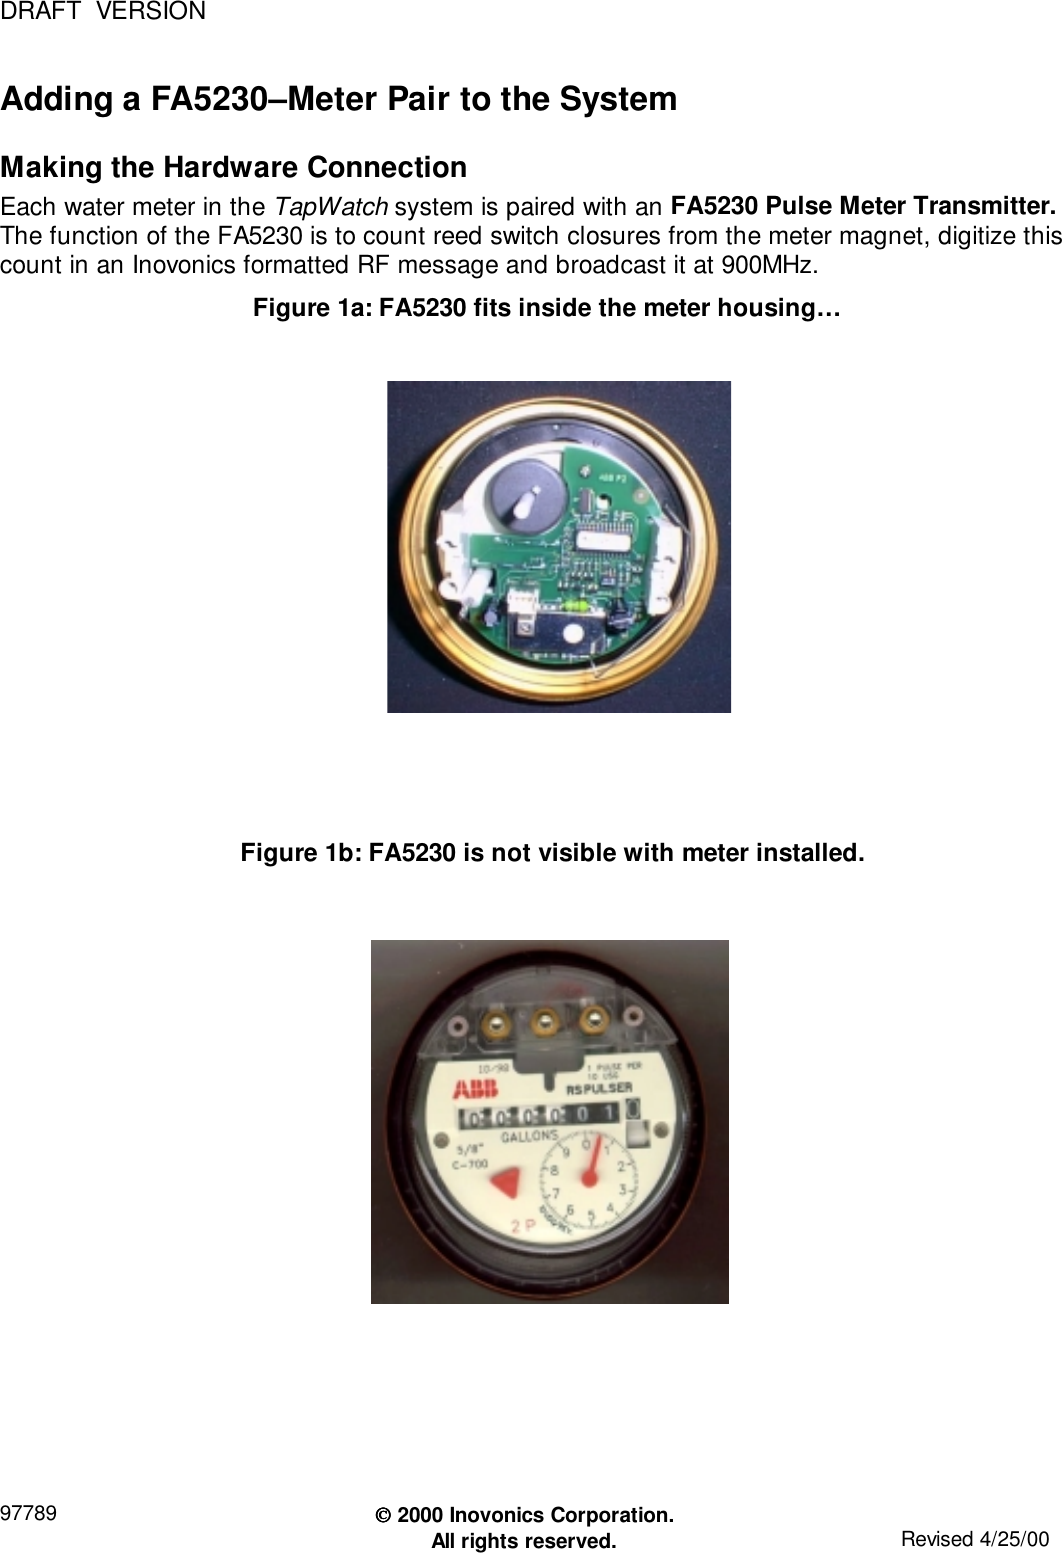 DRAFT  VERSION97789  2000 Inovonics Corporation.All rights reserved. Revised 4/25/00Adding a FA5230–Meter Pair to the SystemMaking the Hardware ConnectionEach water meter in the TapWatch system is paired with an FA5230 Pulse Meter Transmitter.The function of the FA5230 is to count reed switch closures from the meter magnet, digitize thiscount in an Inovonics formatted RF message and broadcast it at 900MHz.Figure 1a: FA5230 fits inside the meter housing…Figure 1b: FA5230 is not visible with meter installed.